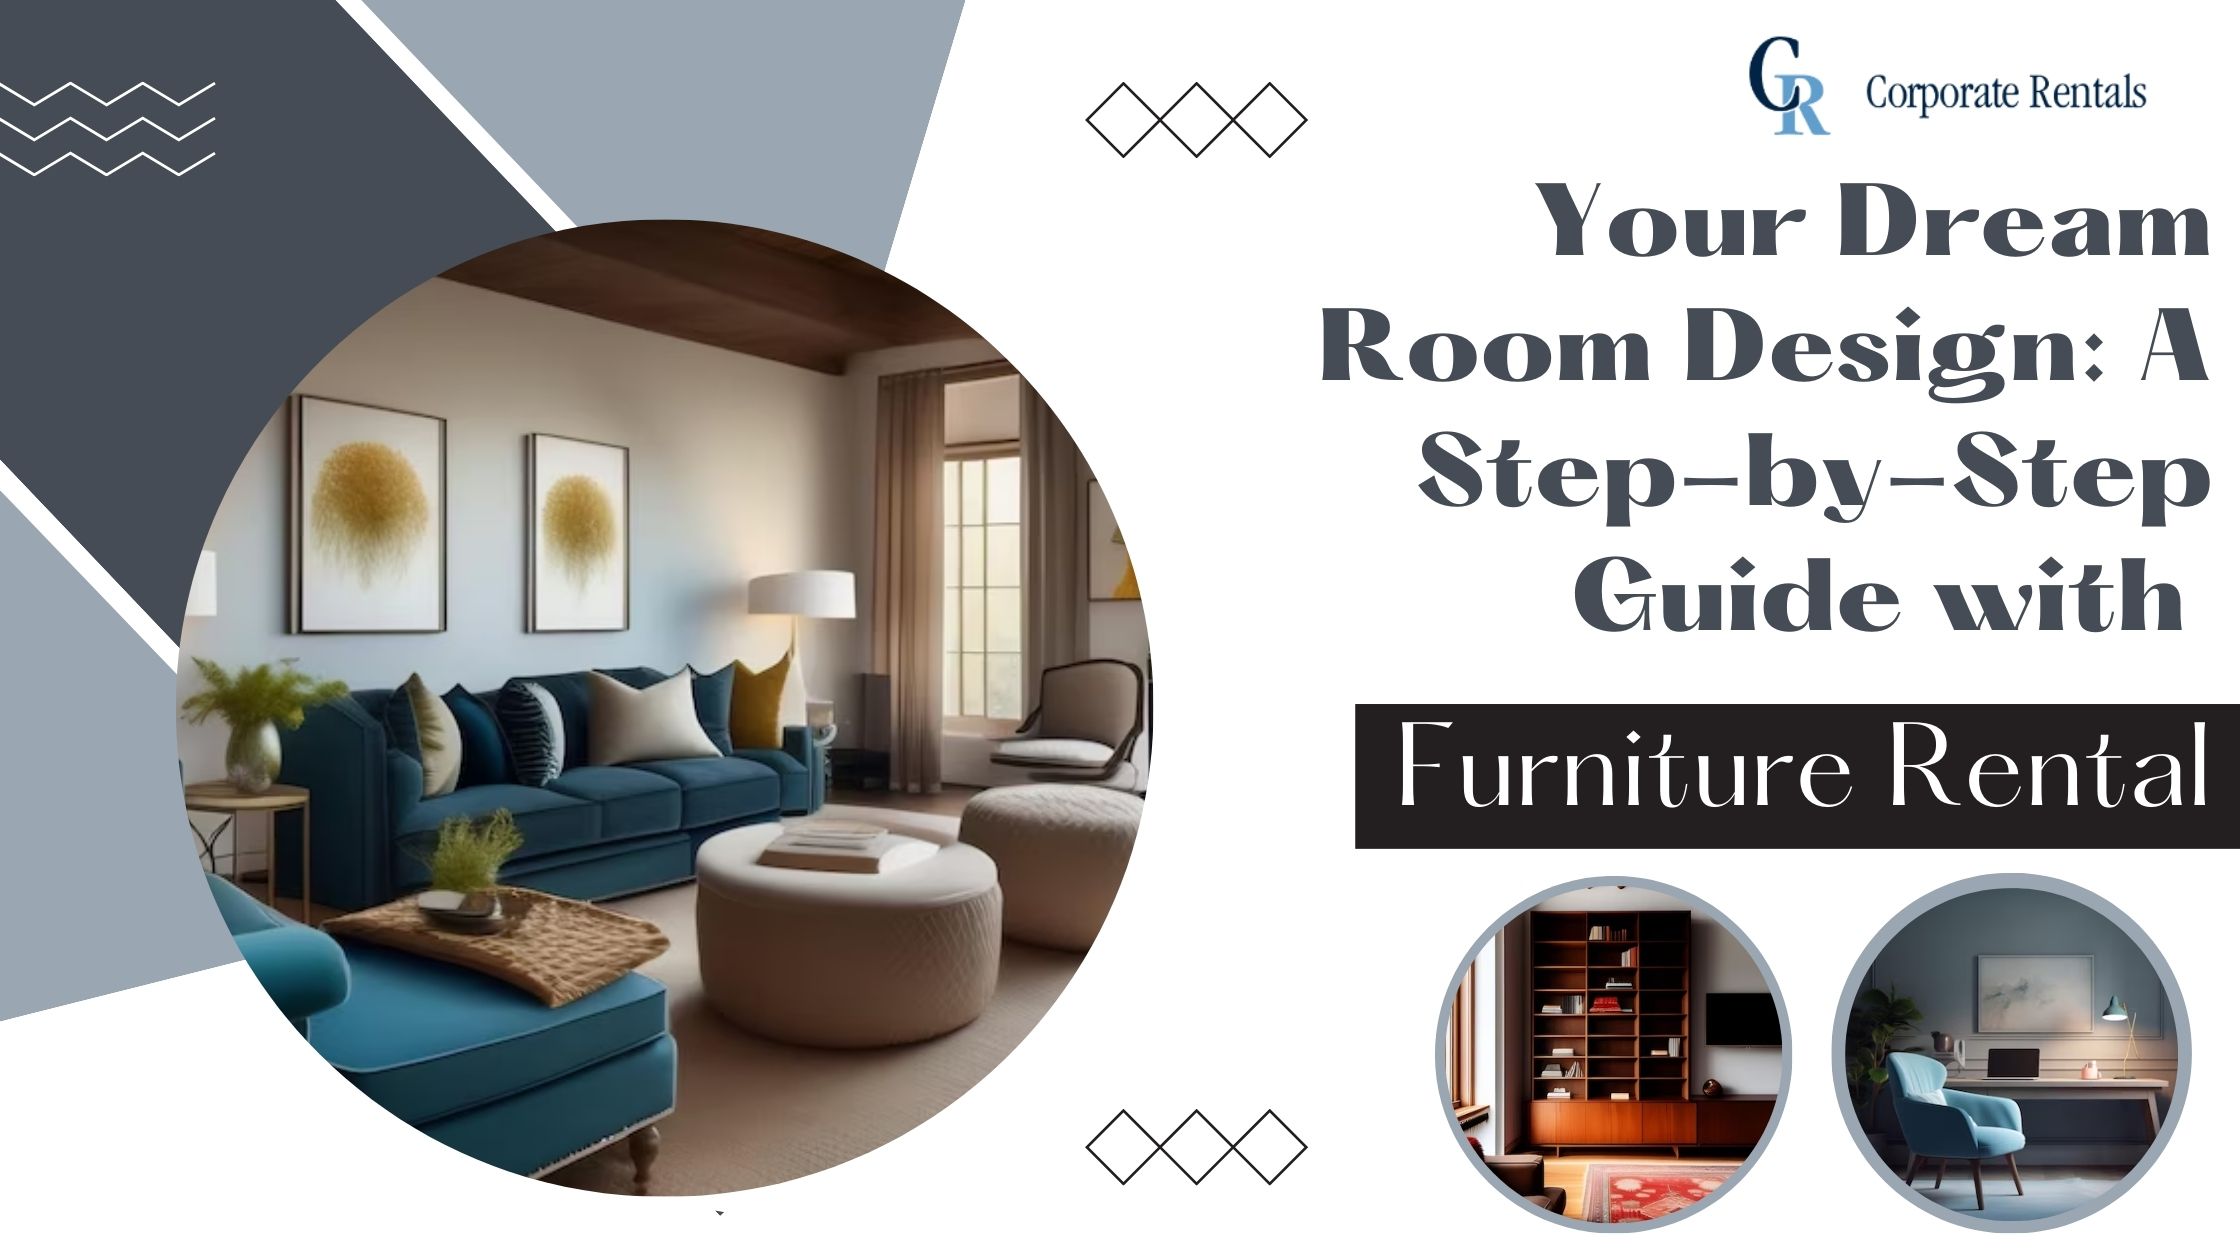 Your Dream Room Design: A Step-by-Step Guide with Furniture Rental